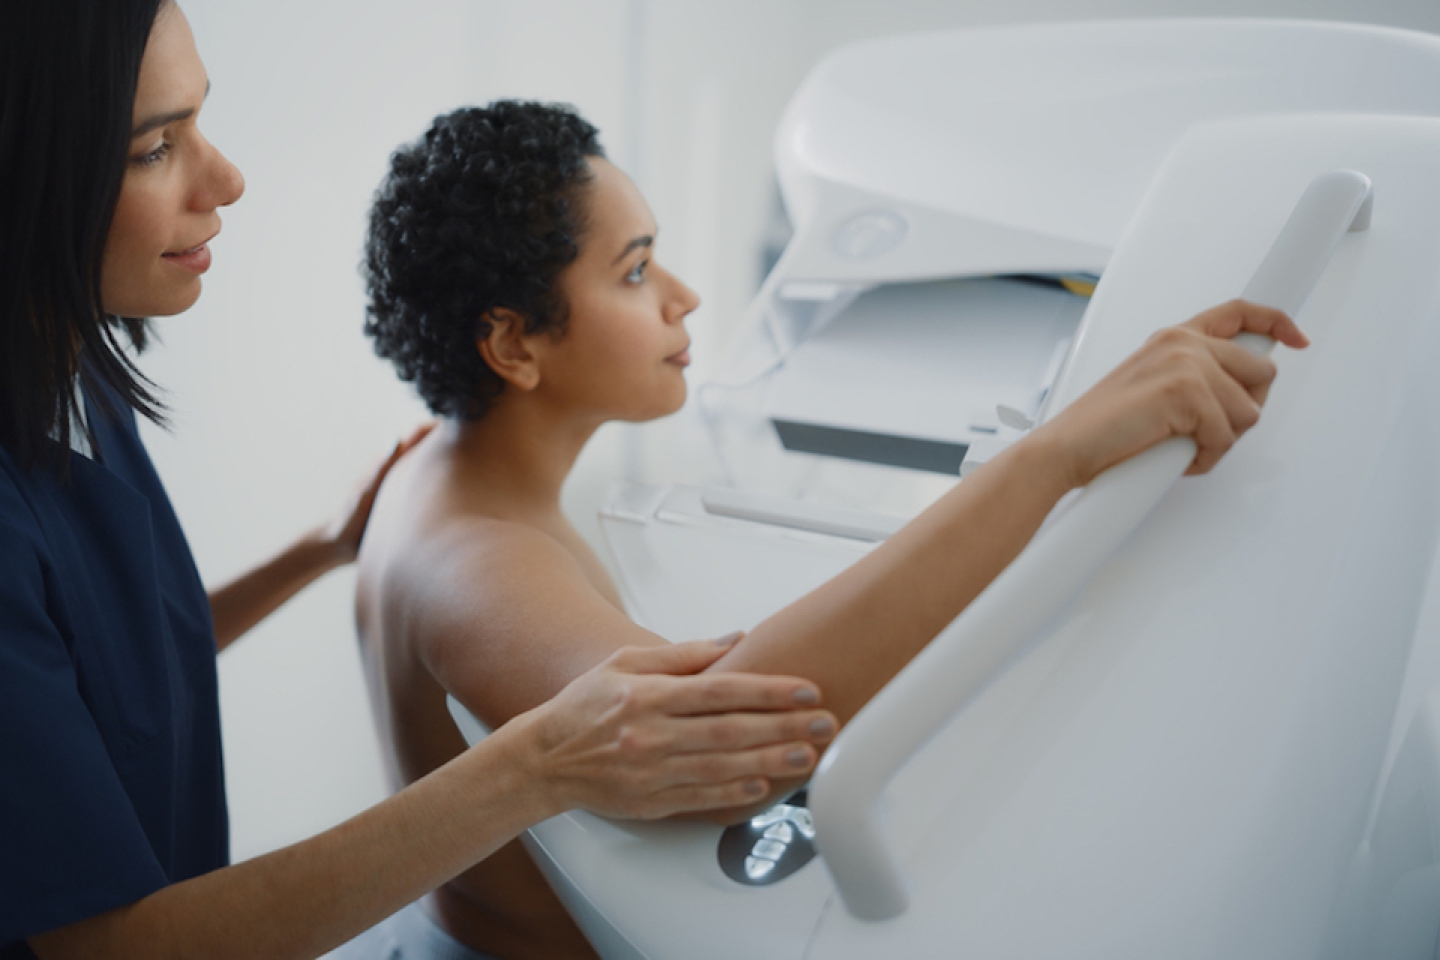  Friendly Female Doctor Explains the Mammogram Procedure to a Topless Latin Female Patient with Curly Hair Undergoing Mammography Scan.